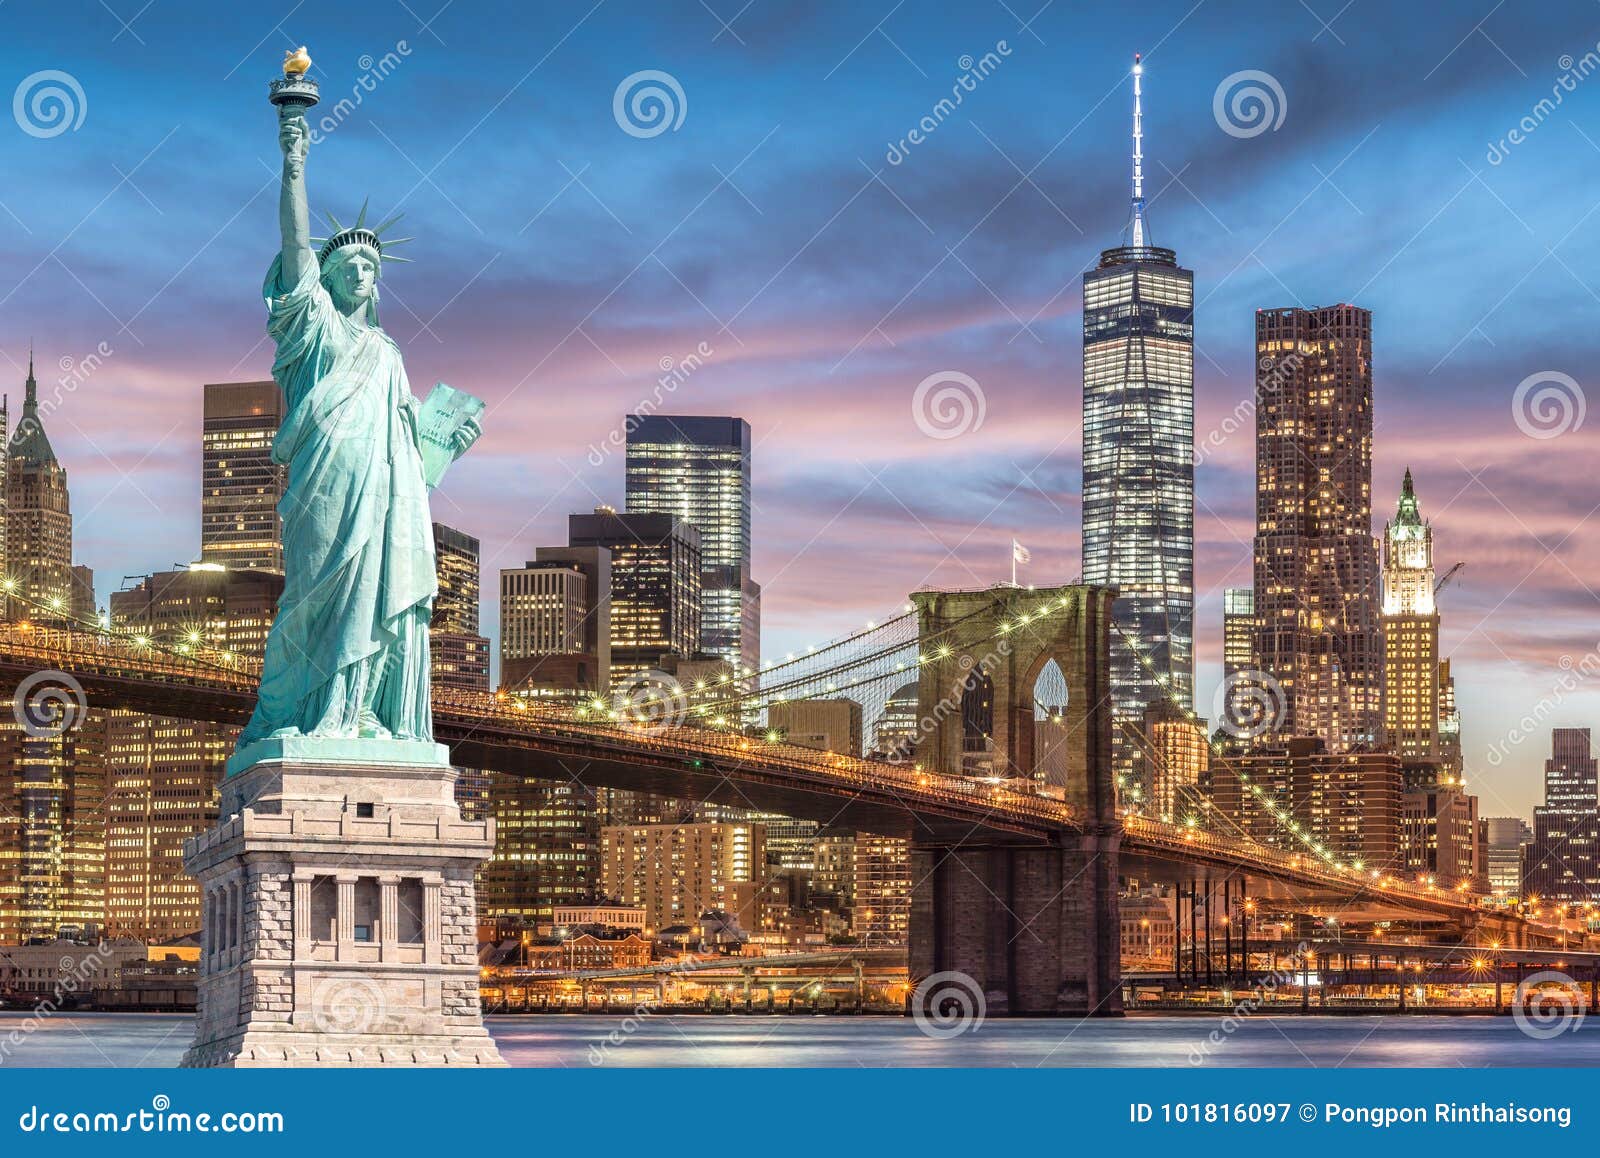 the statue of liberty and brooklyn bridge with world trade center background twilight sunset view, landmarks of new york city